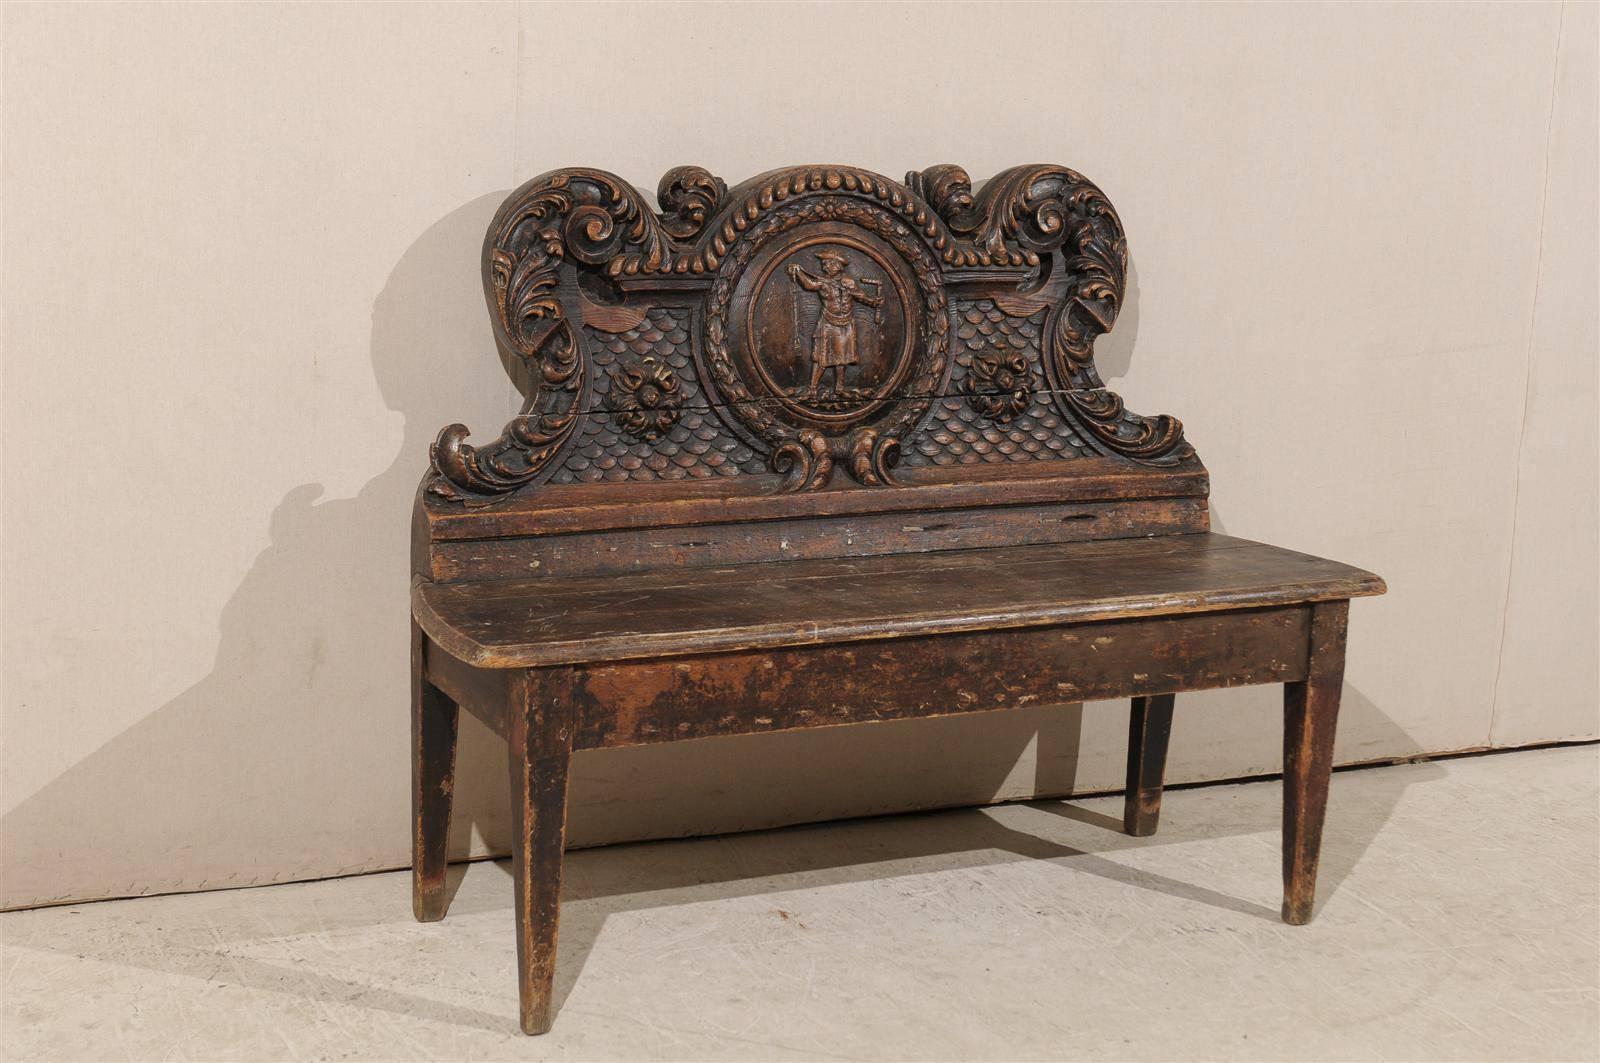 18th Century and Earlier An Italian 18th Century Richly-Carved Wood Bench with Ornate Backrest  